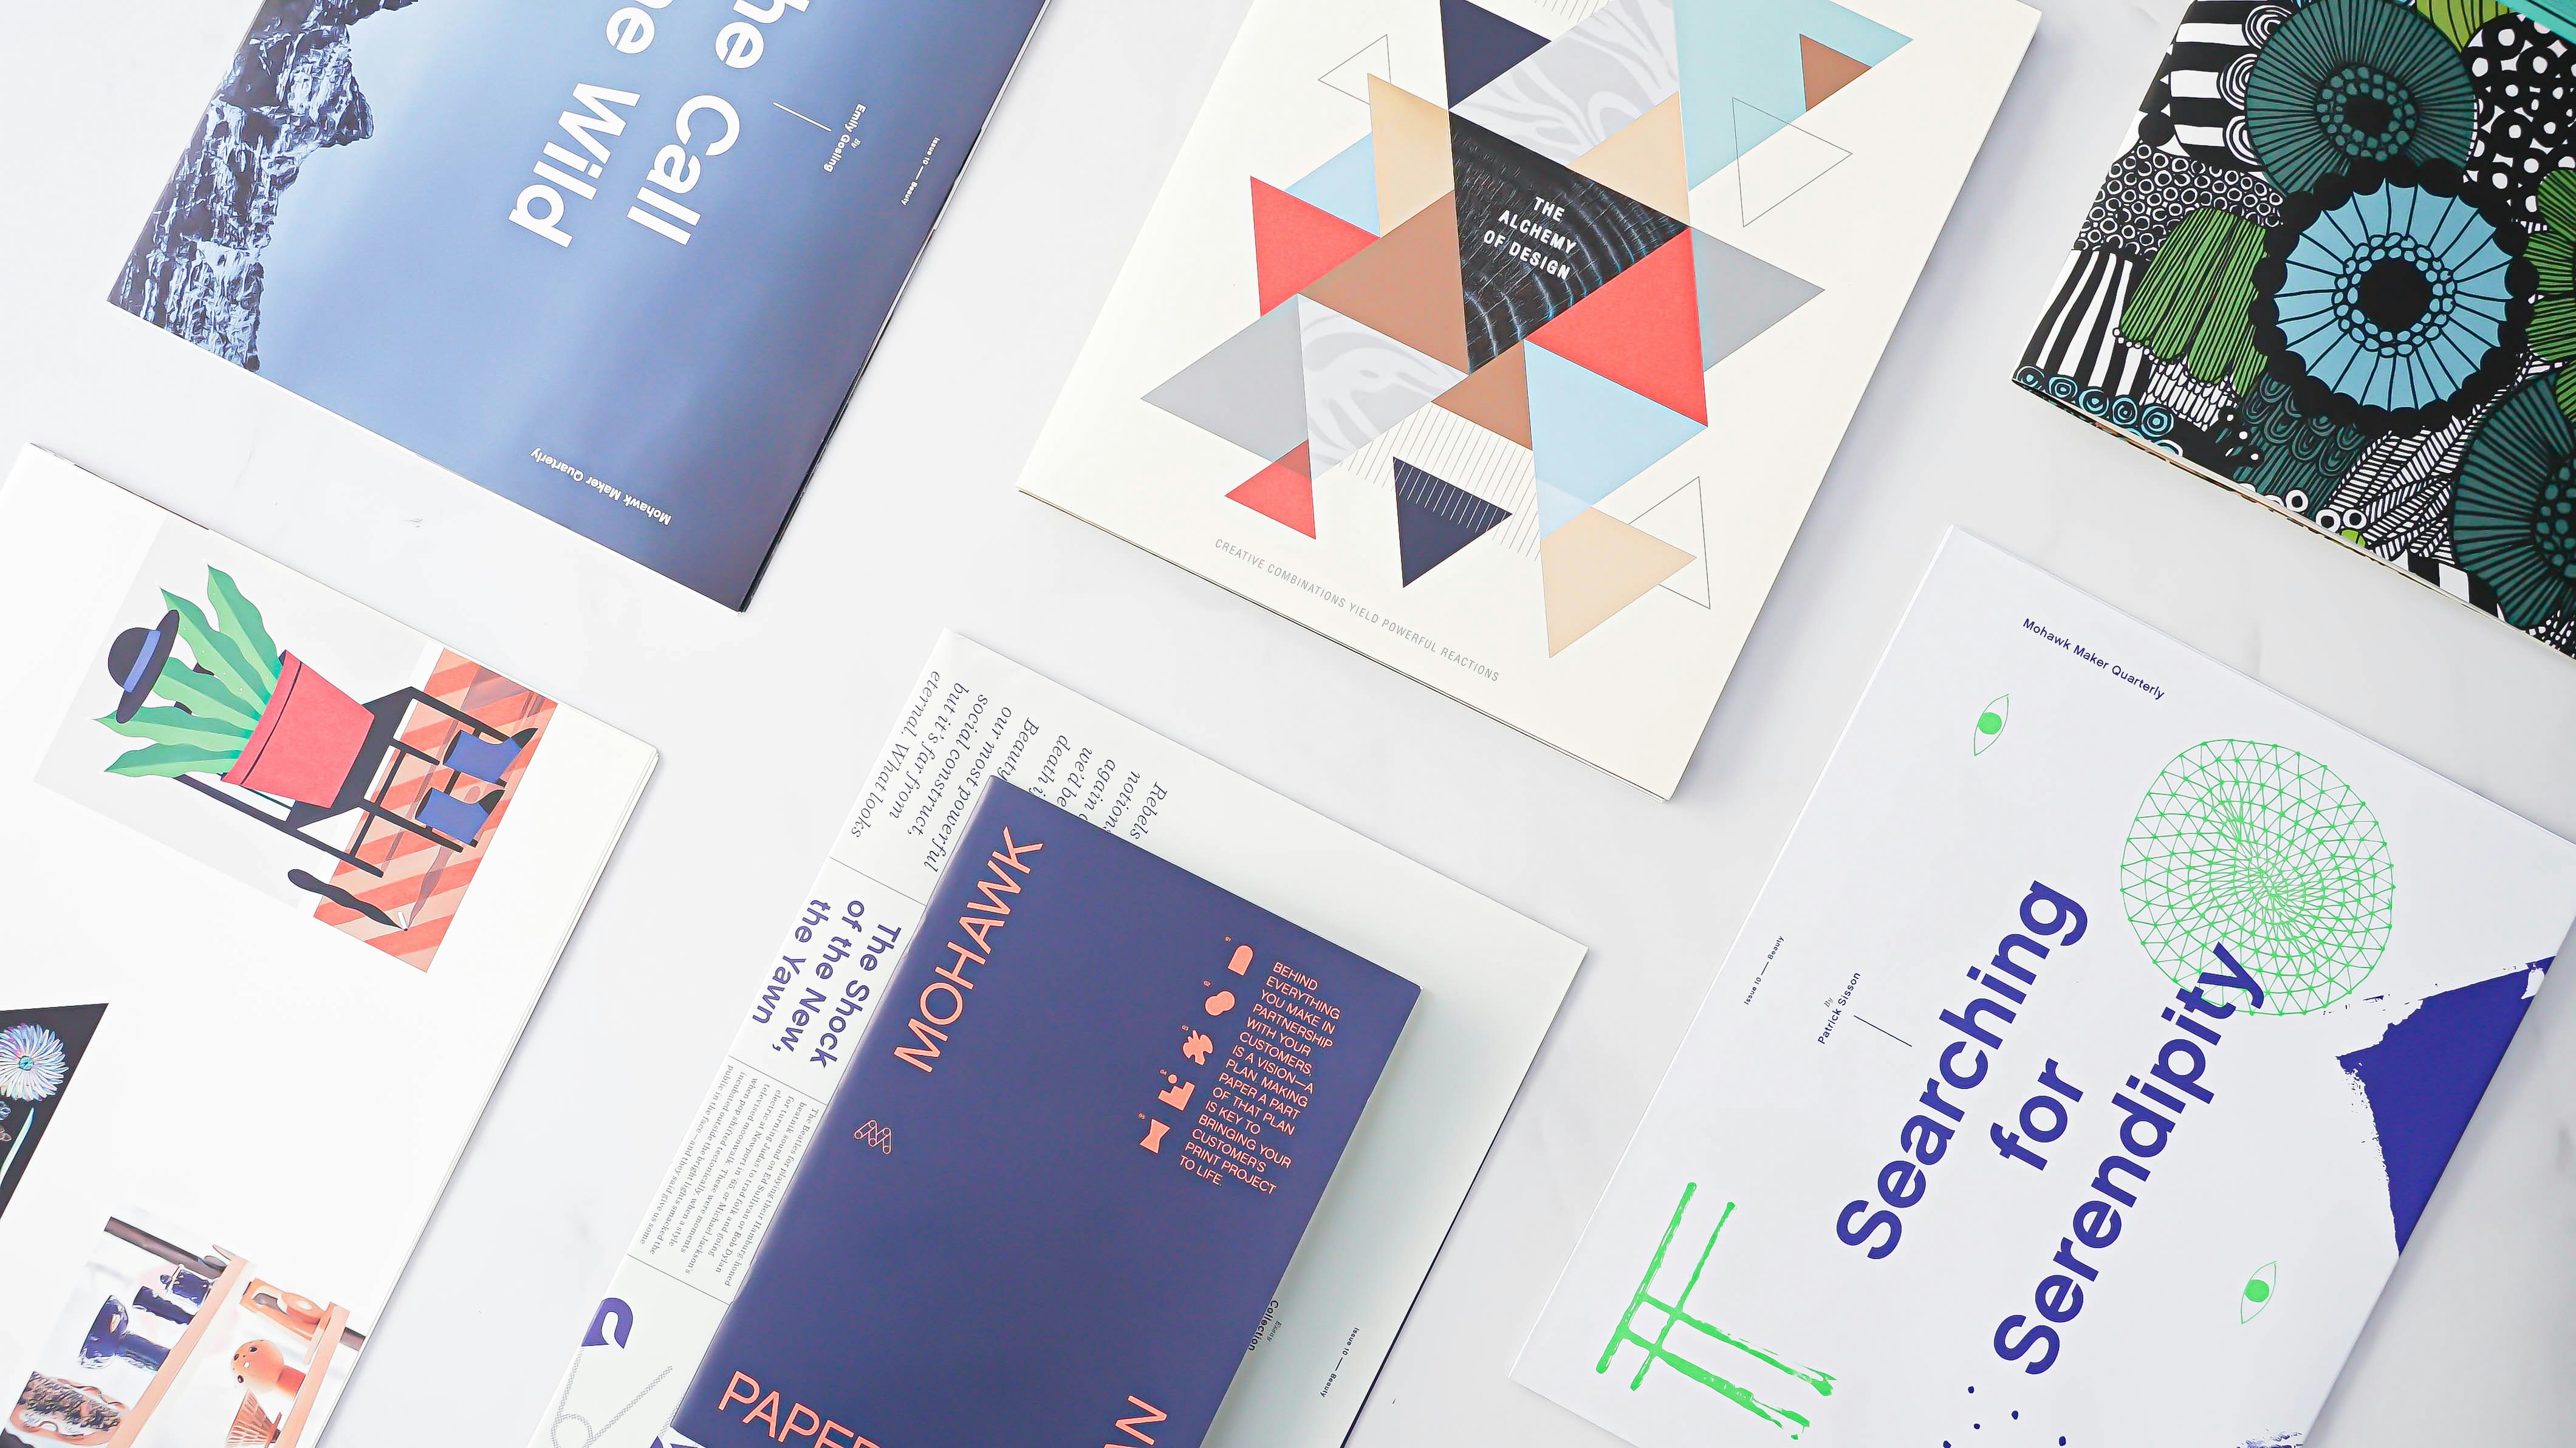 Visual Identity: Branded Brochures showcasing vibrant colors and clear imagery